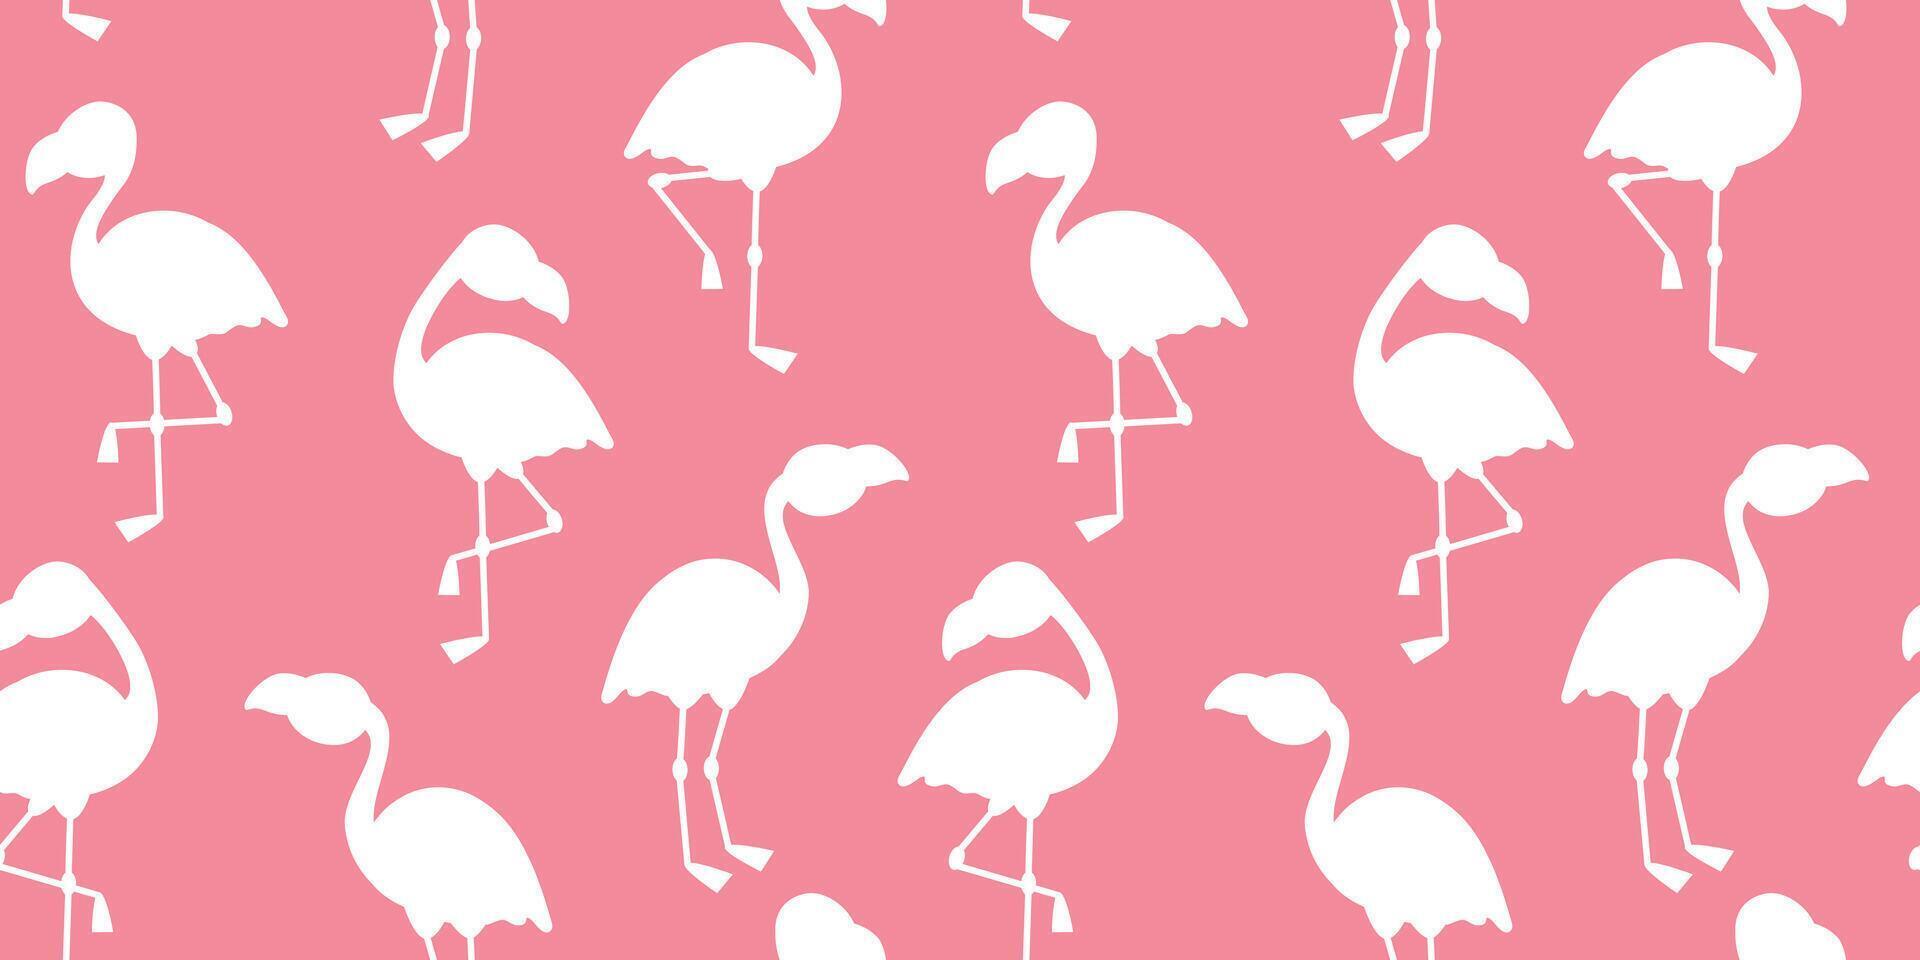 White flamingo silhouette on pink background seamless pattern for fabric, wrapping paper, print, decor. Vector illustration